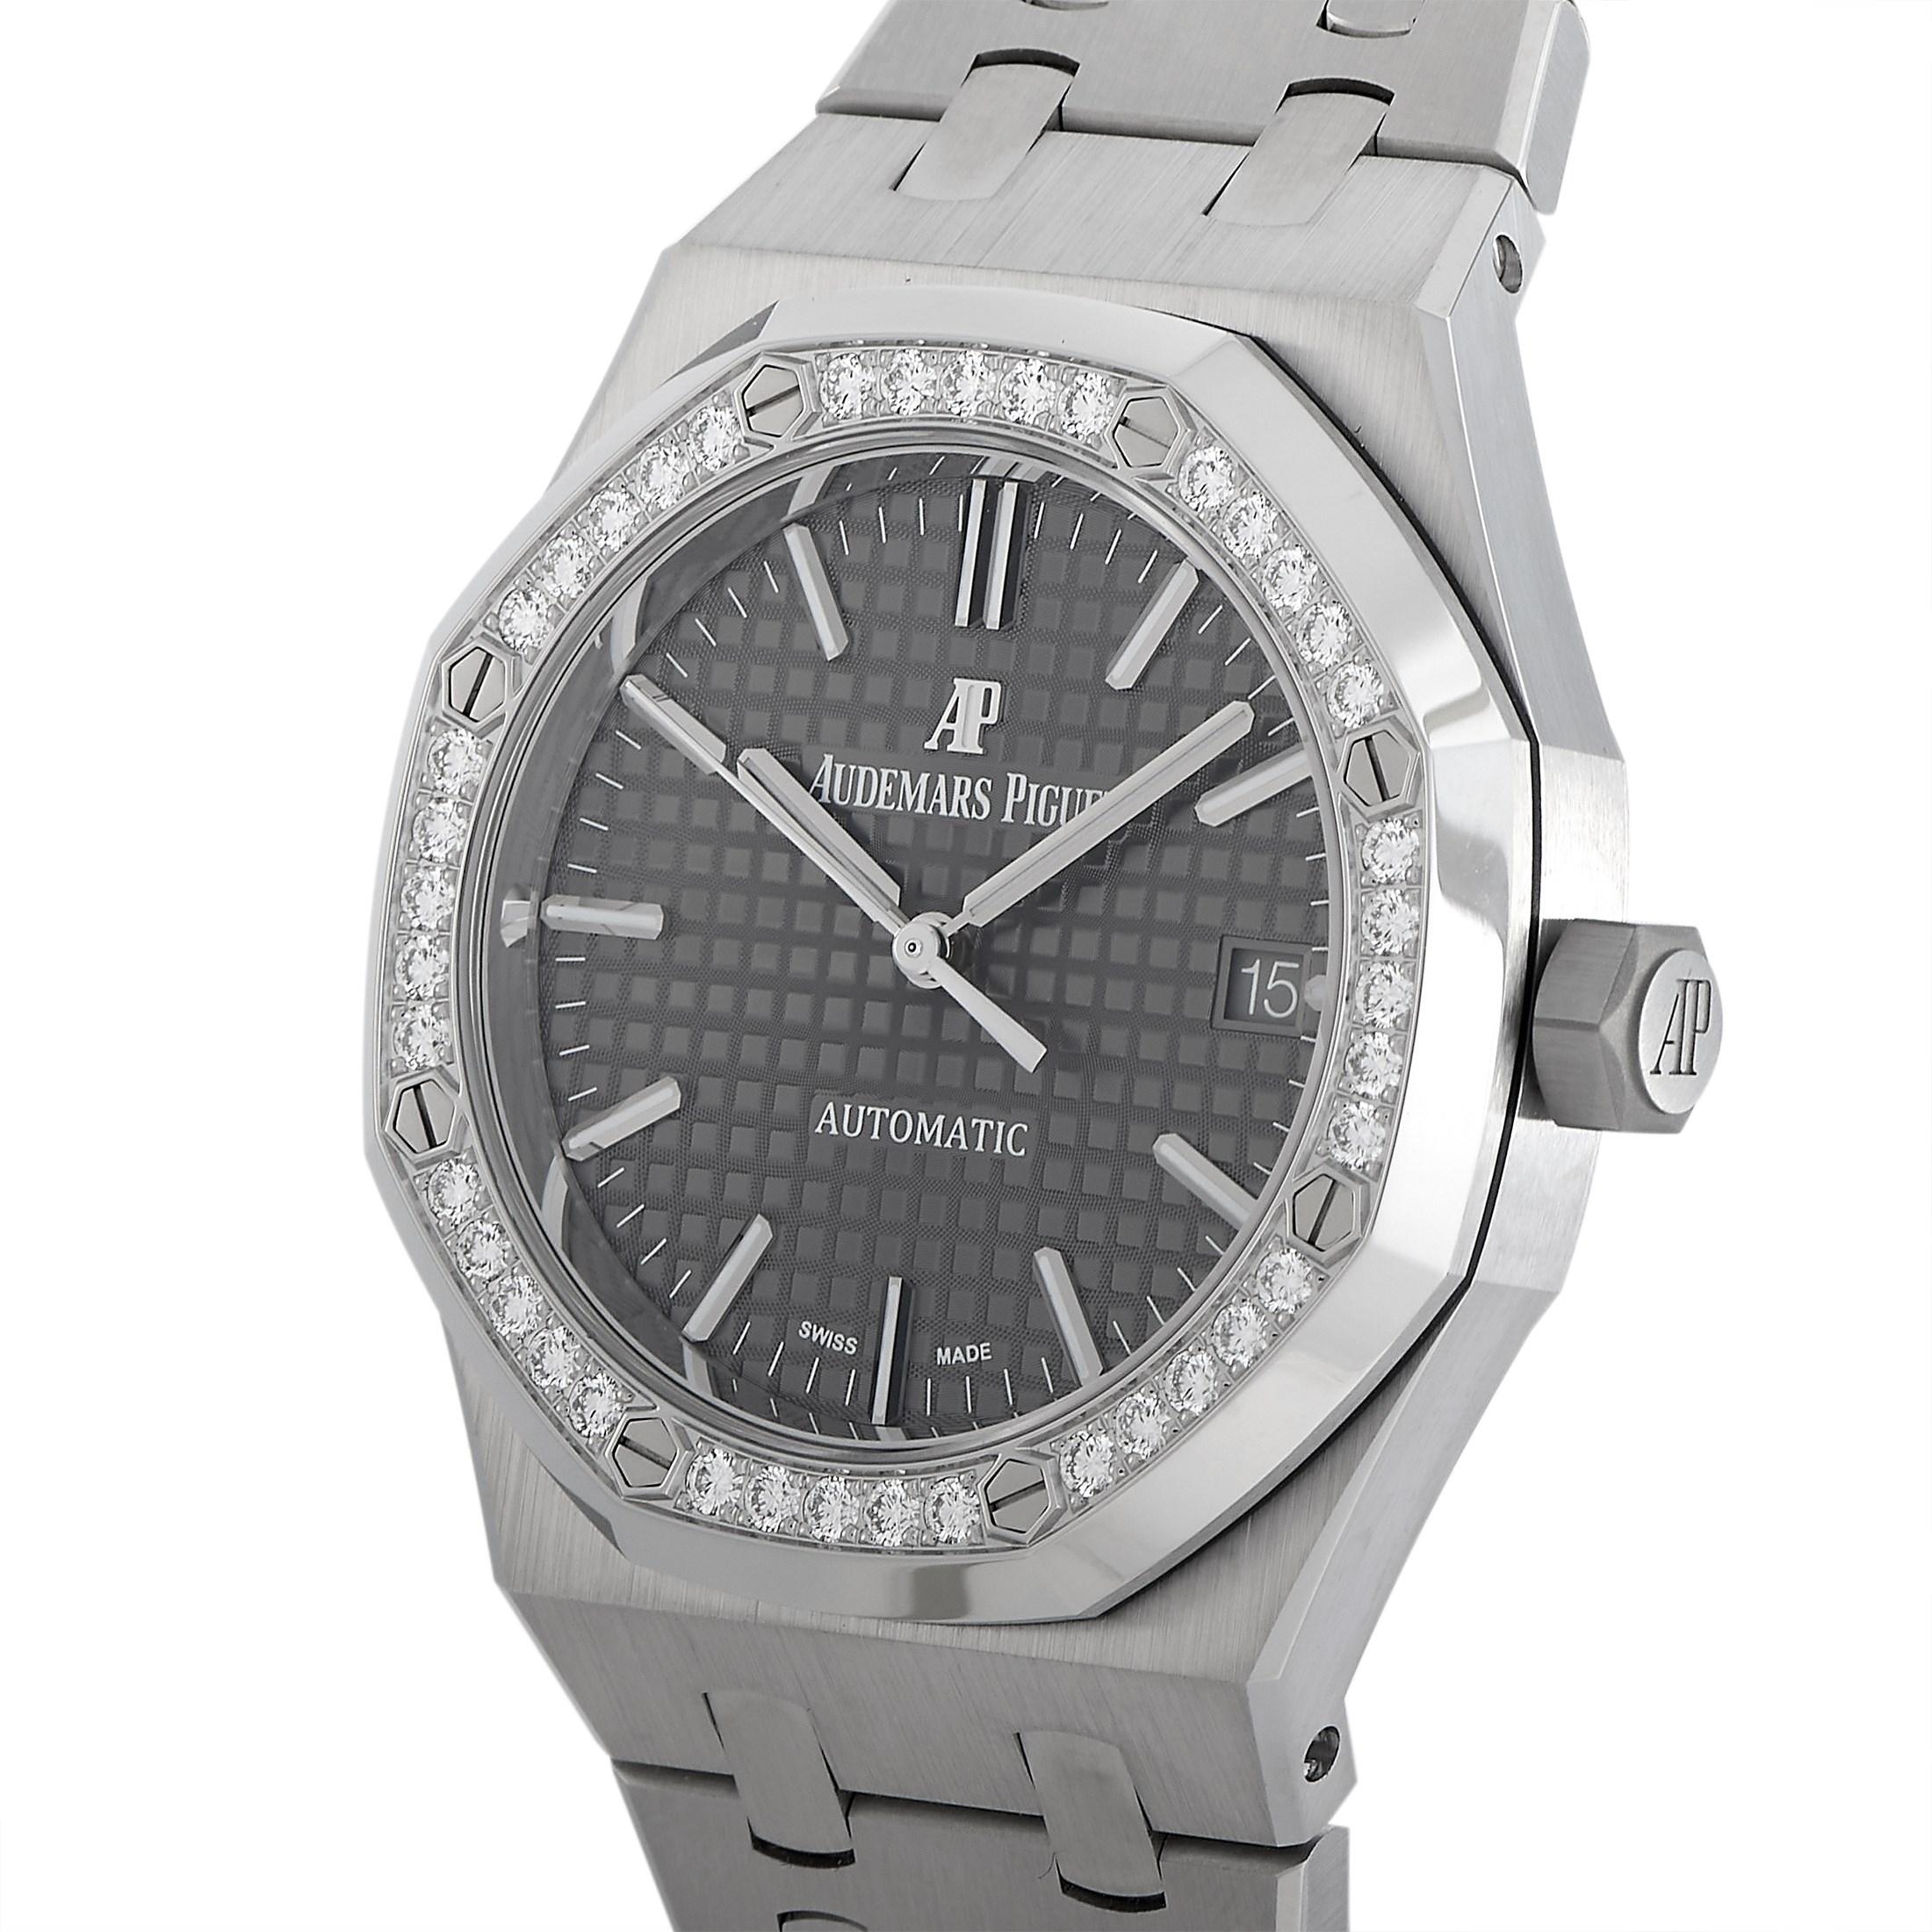 Add a little sparkle to your day with this Audemars Piguet Royal Oak Diamond Automatic Watch 15451ST.ZZ.1256ST.02. On its recognizable octagonal bezel with 8 polished steel screws are 40 diamonds that elegantly glisten. The stainless steel case is